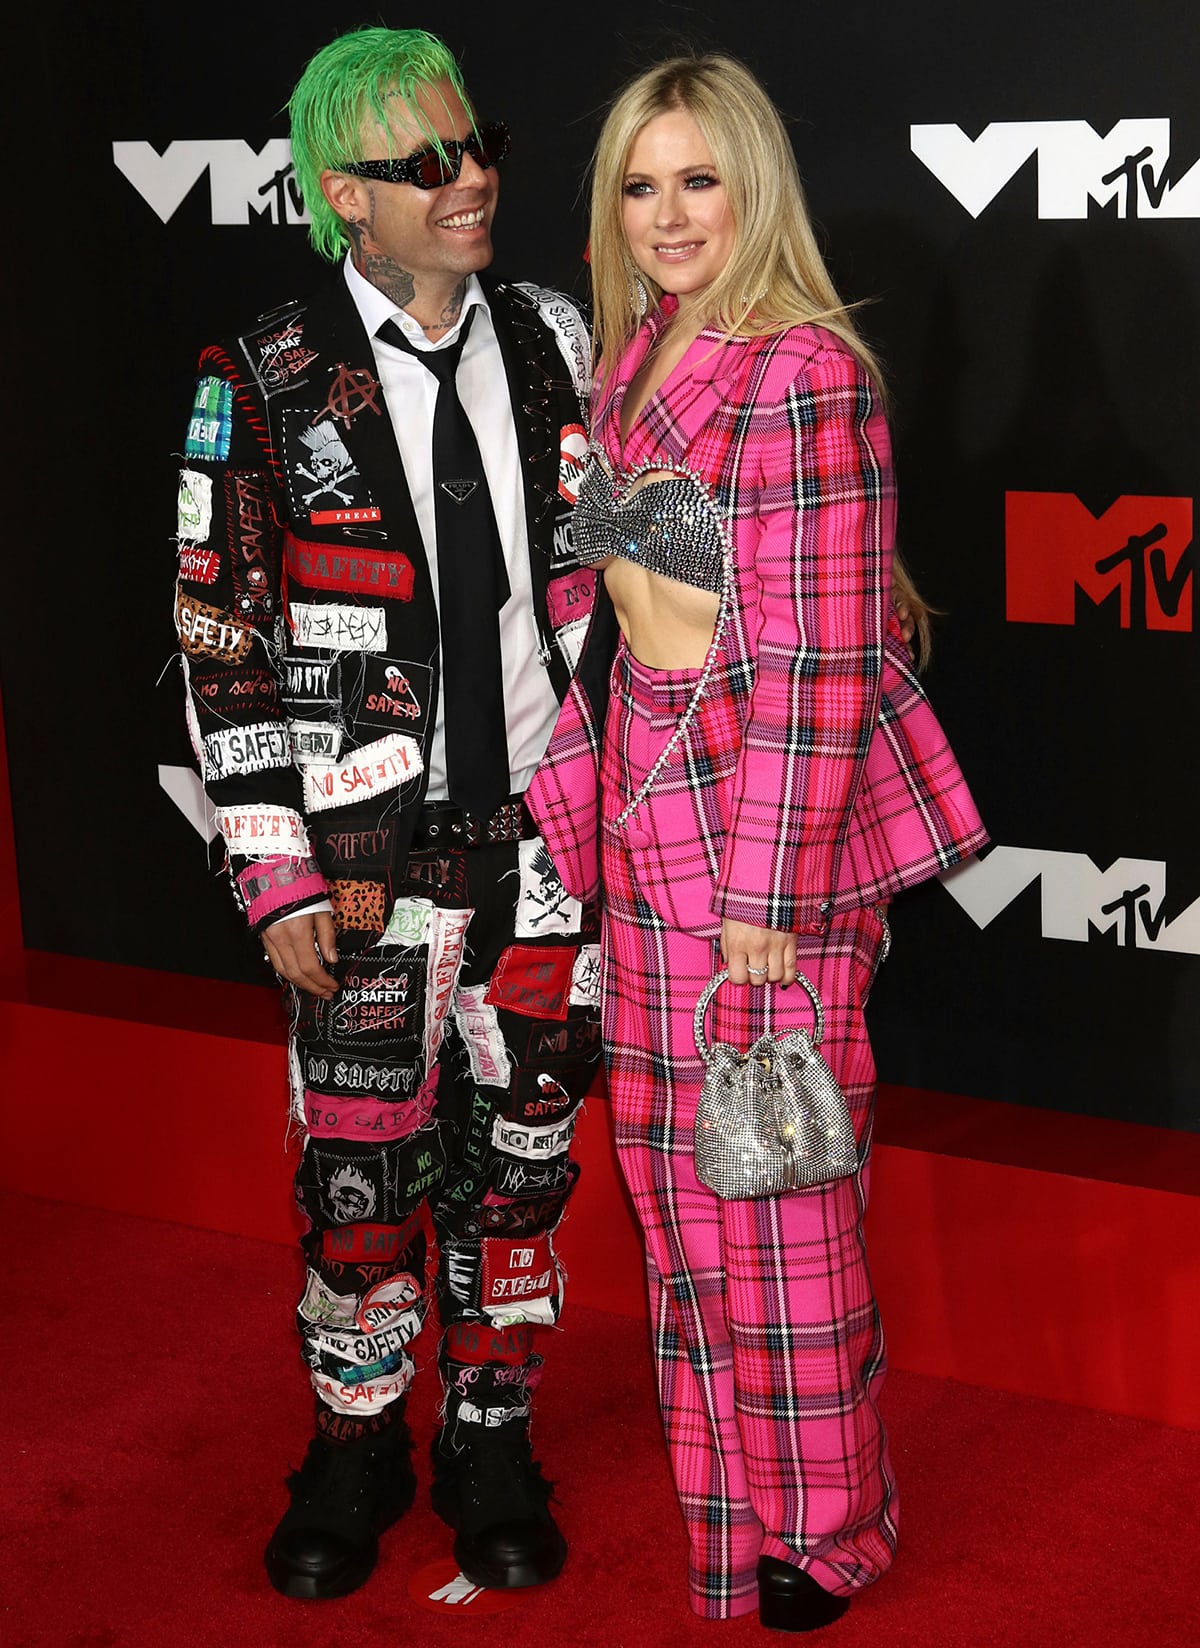 Mod Sun and Avril Lavigne pictured at the MTV Video Music Awards 2021 